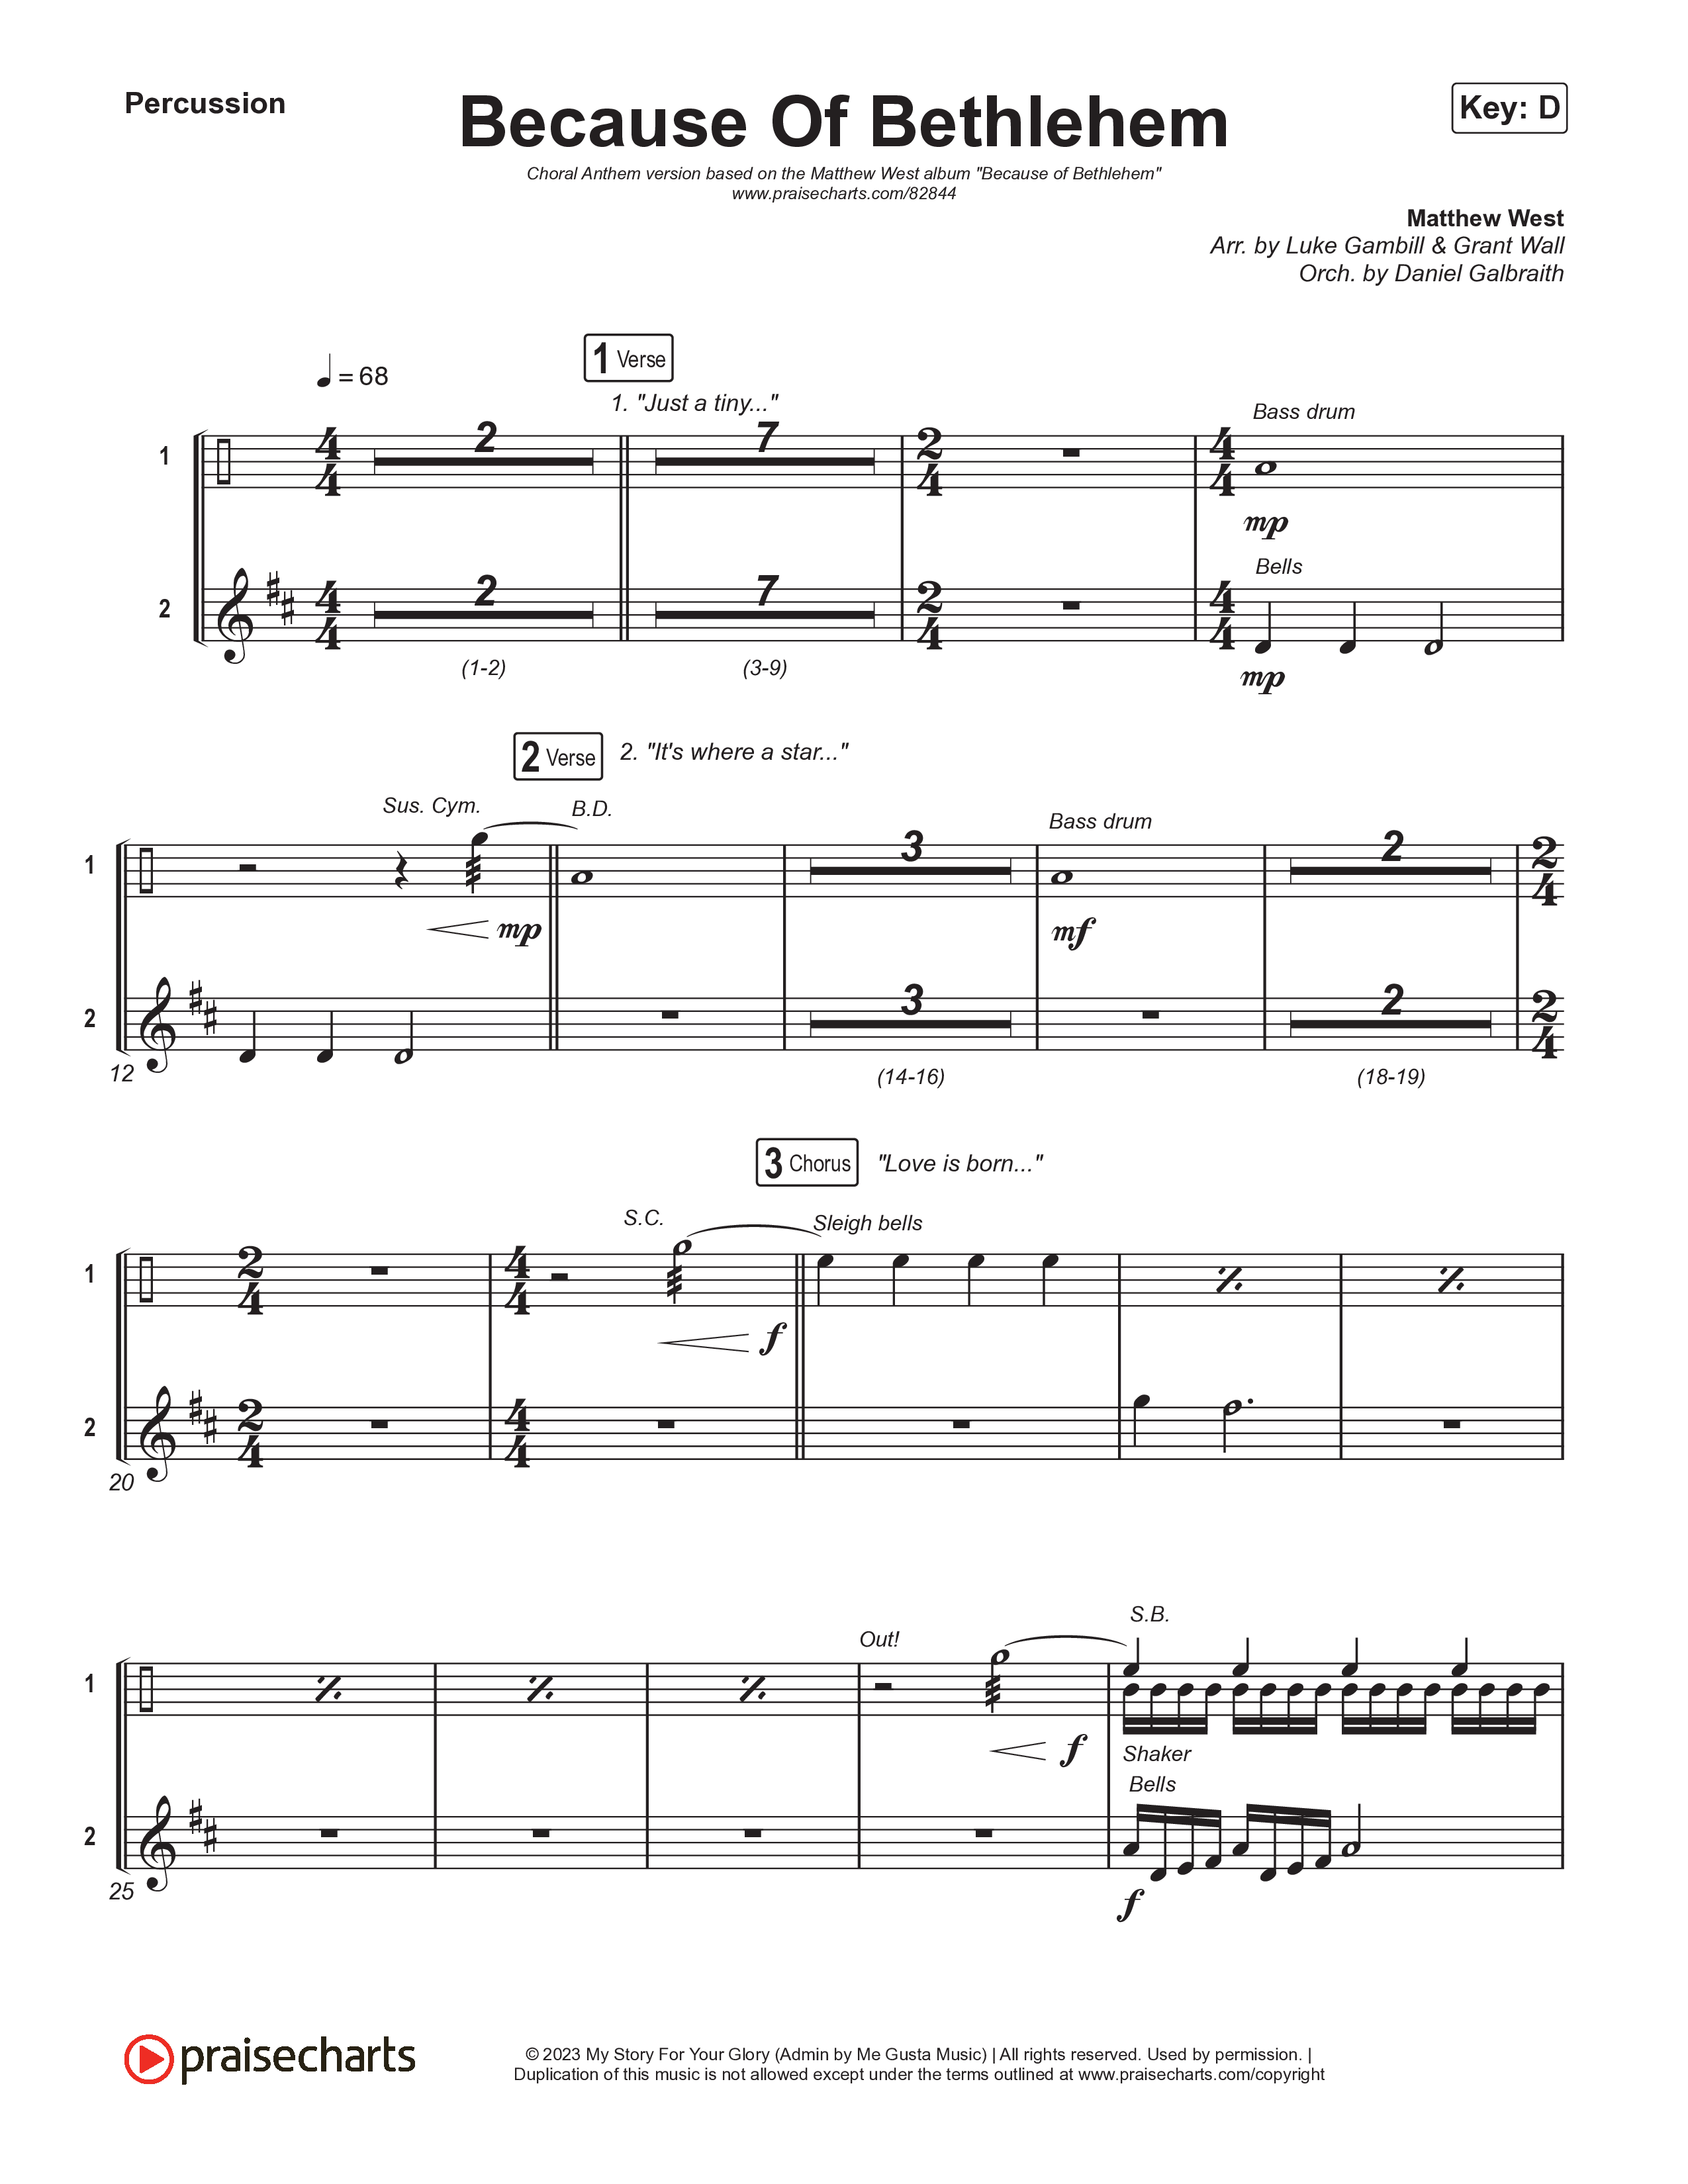 Because Of Bethlehem (Choral Anthem SATB) Percussion (Matthew West / Arr. Luke Gambill)